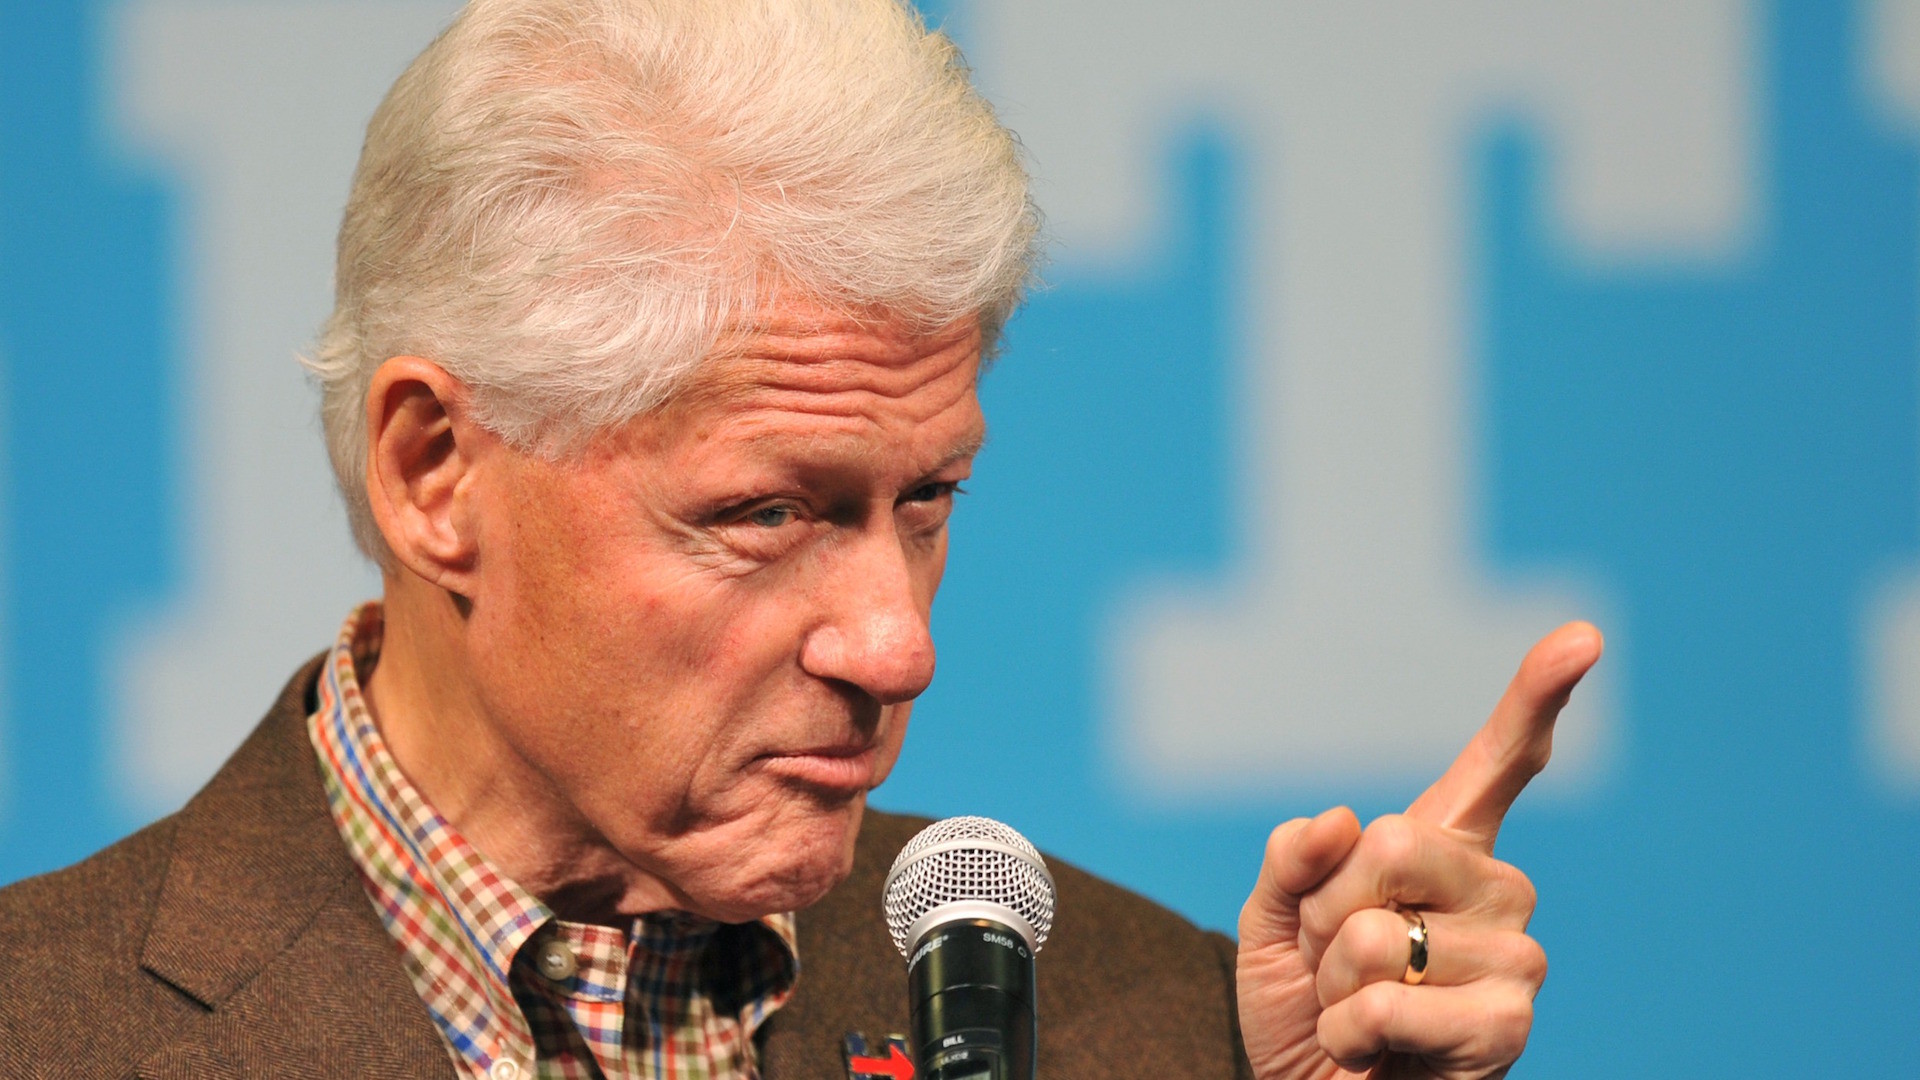 How Bill Clinton made things awkward for Hillarys 2016 campaign – The Washington Post